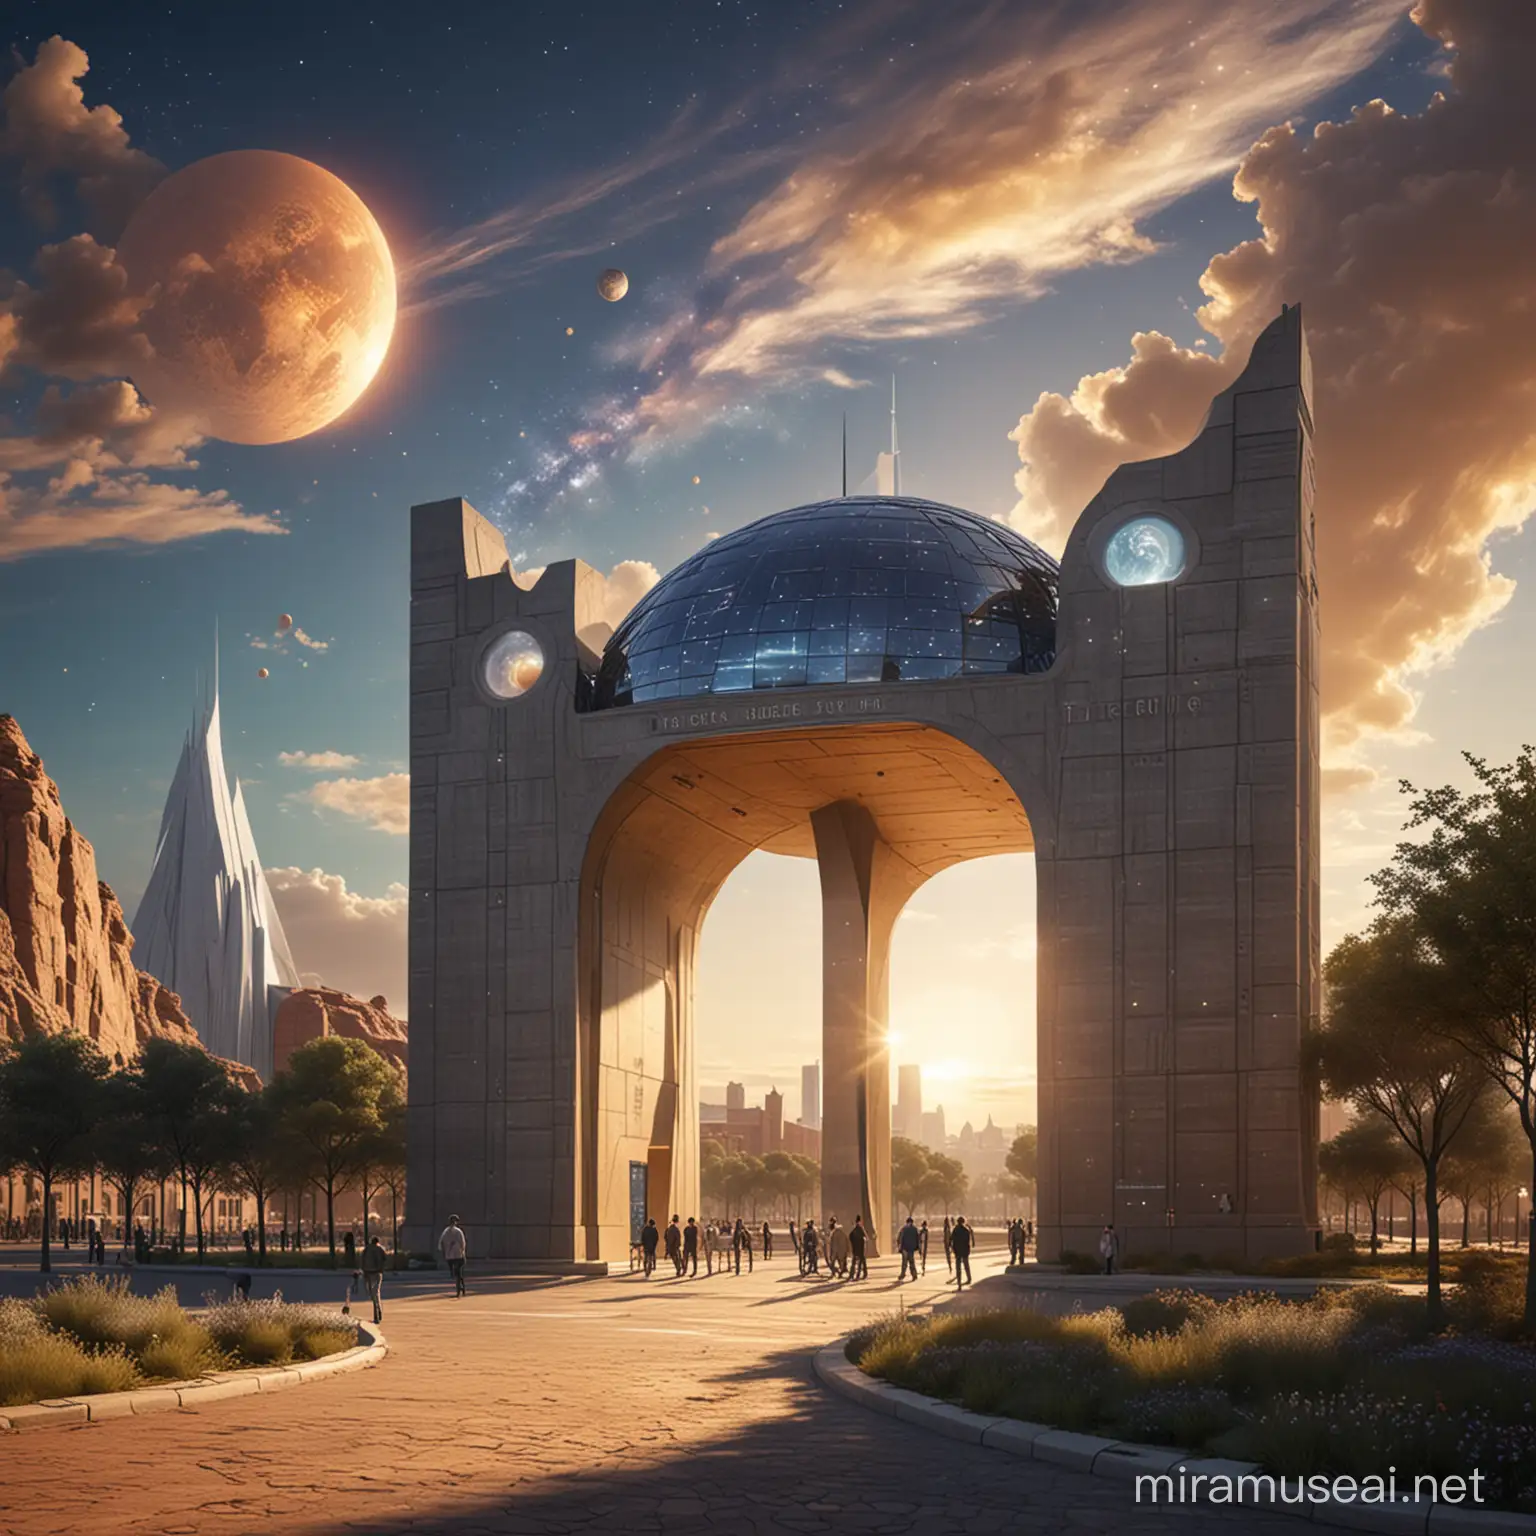 A gateway to a city of scientific inventions inspired by the shape of the solar system


